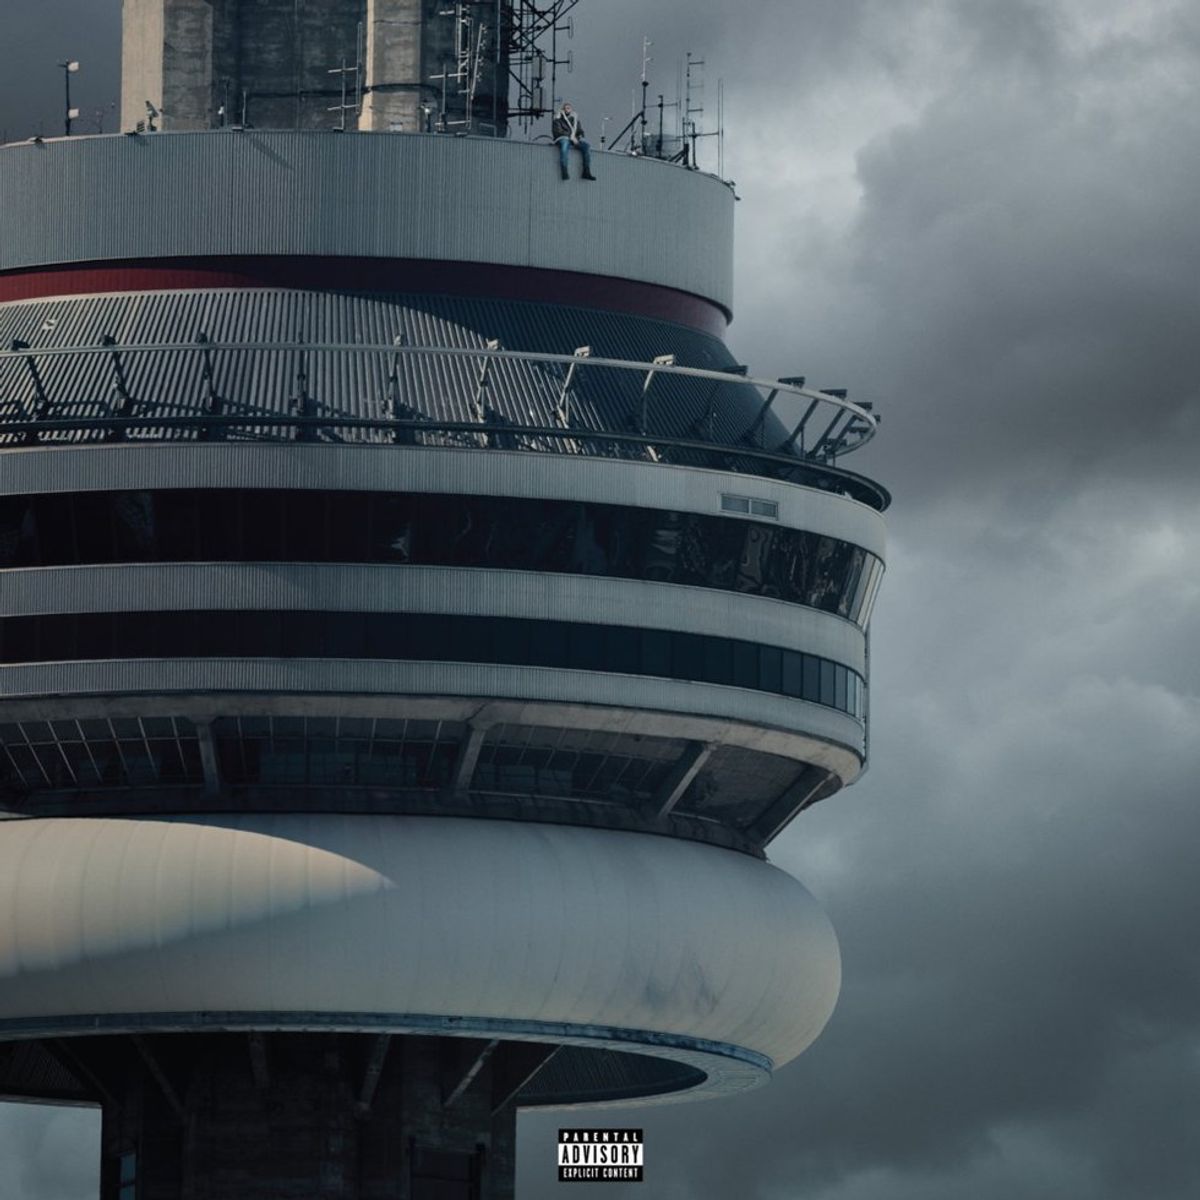 20 Drake Gifs To Describe Every Song On 'Views'